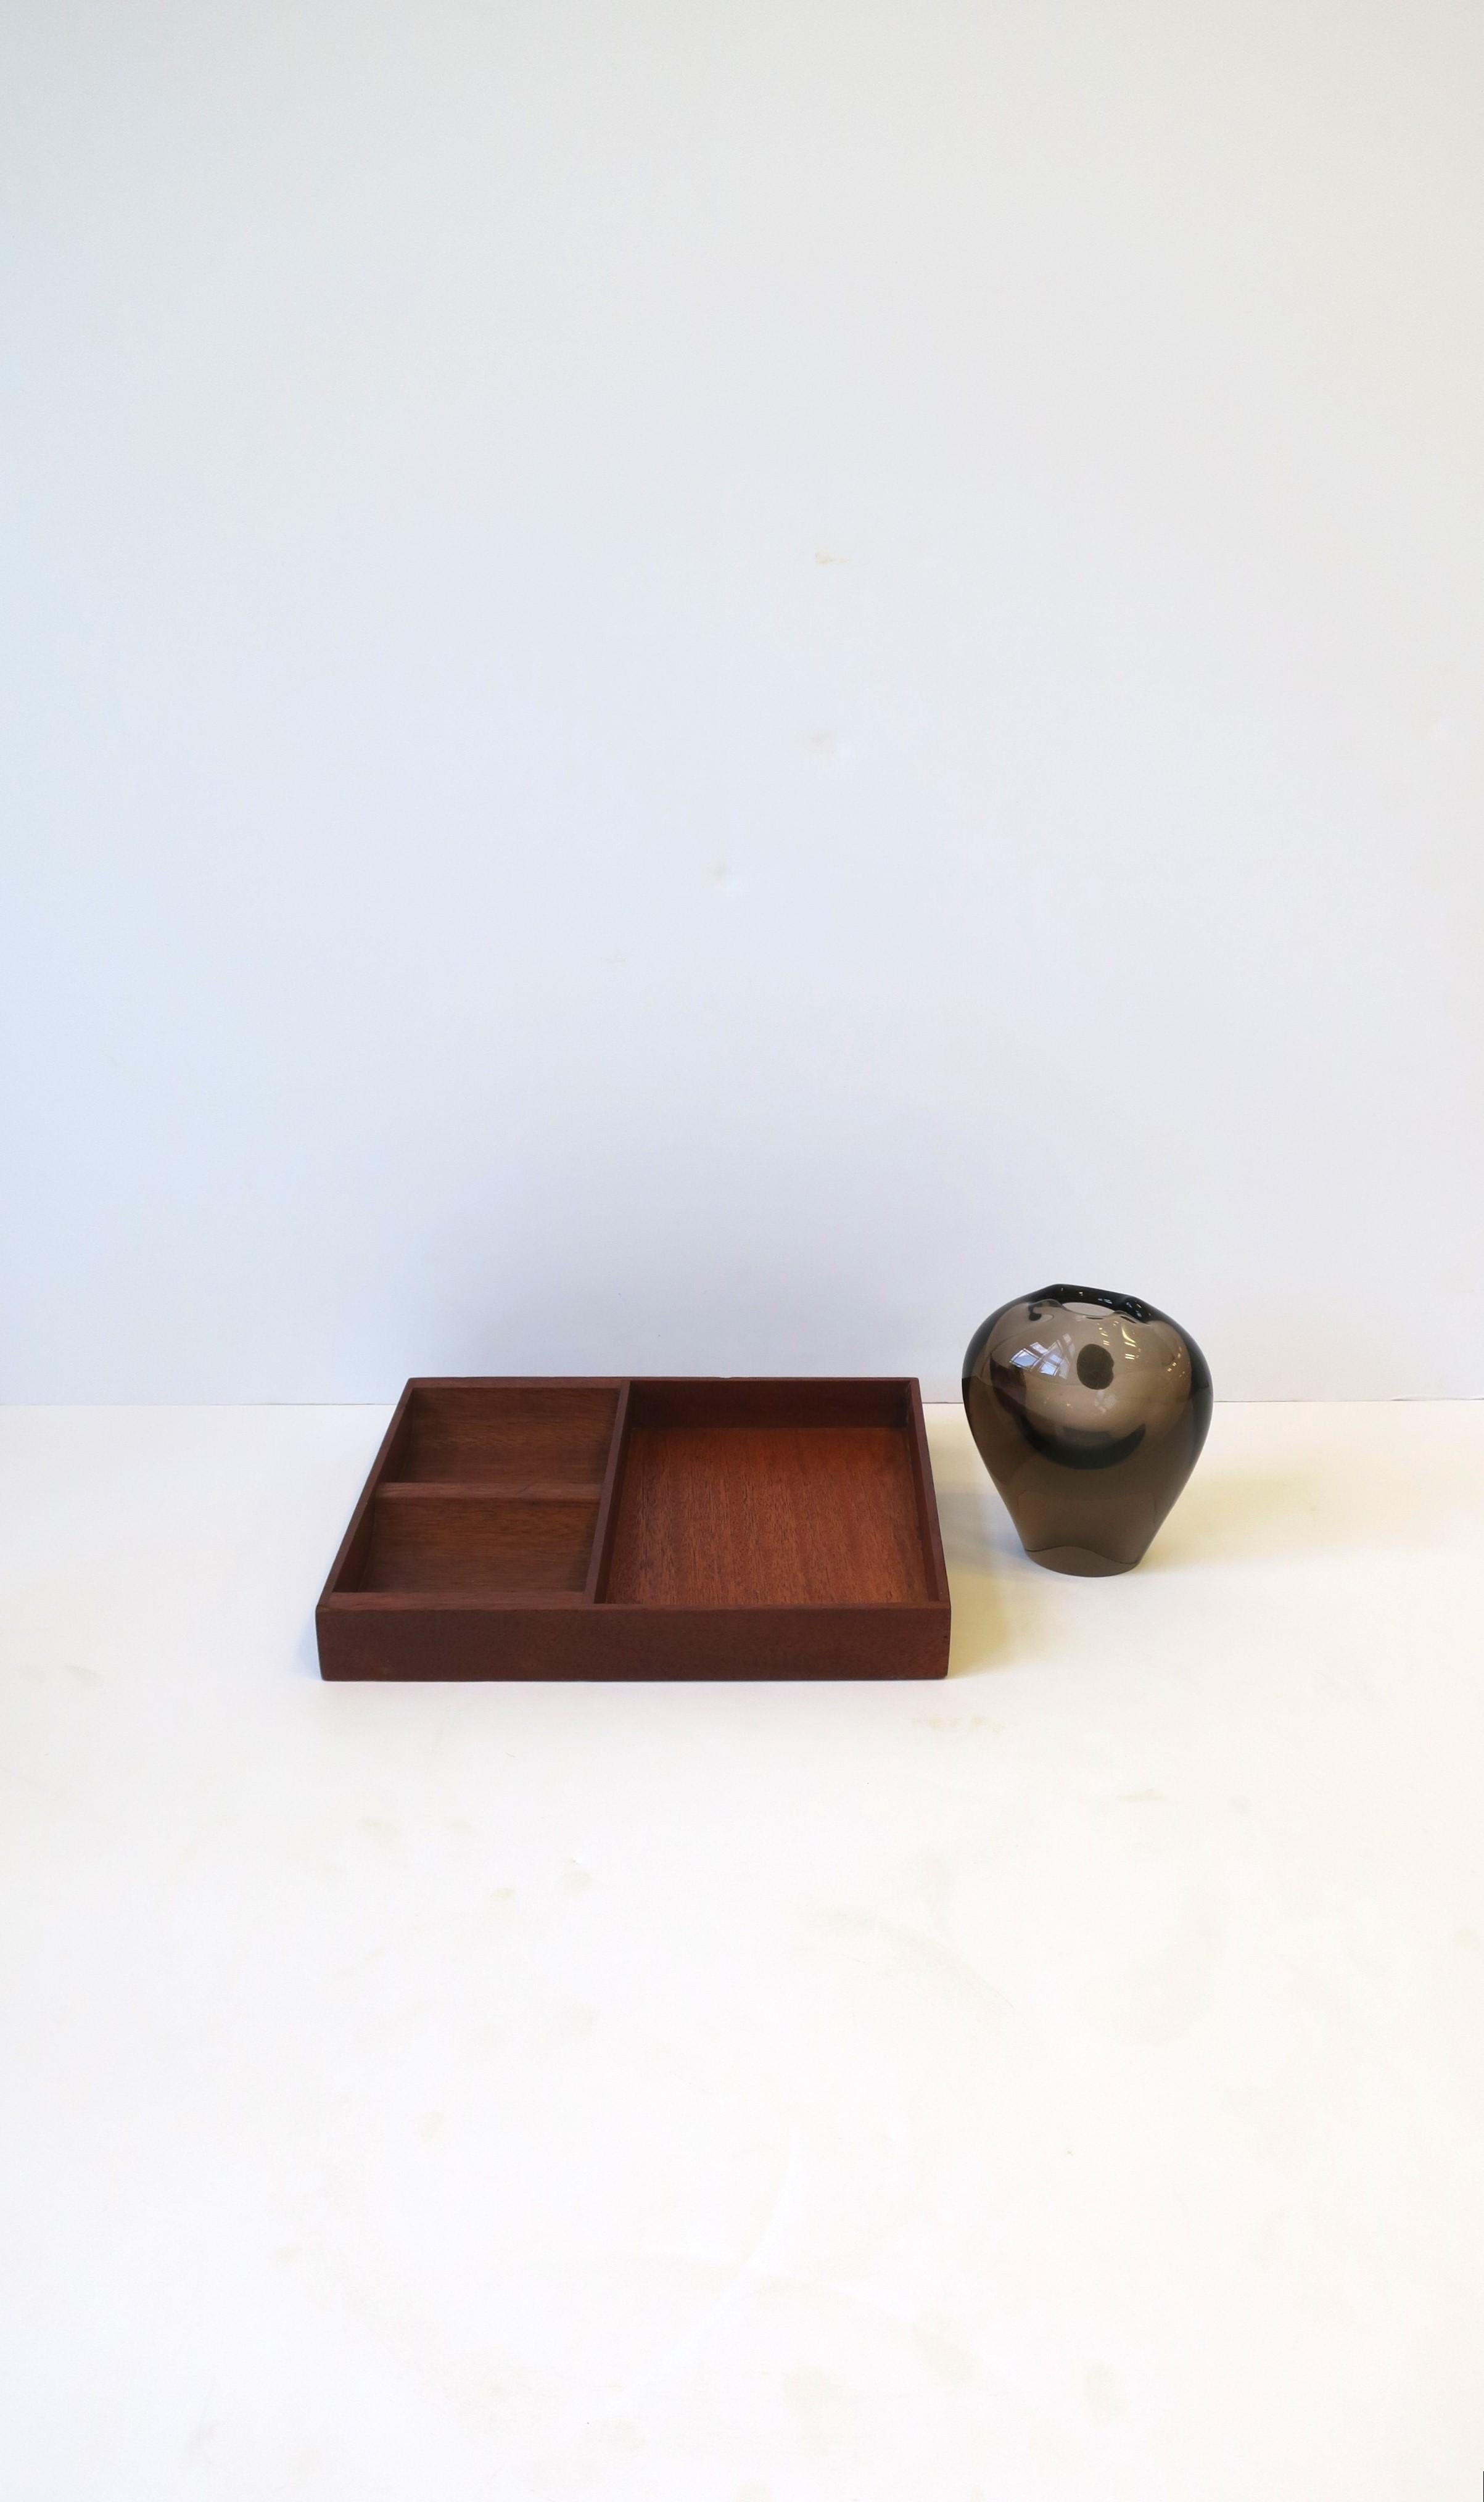 Midcentury Modern Minimalist Desk or Vanity Tray Organizer Vide-Poche In Good Condition For Sale In New York, NY